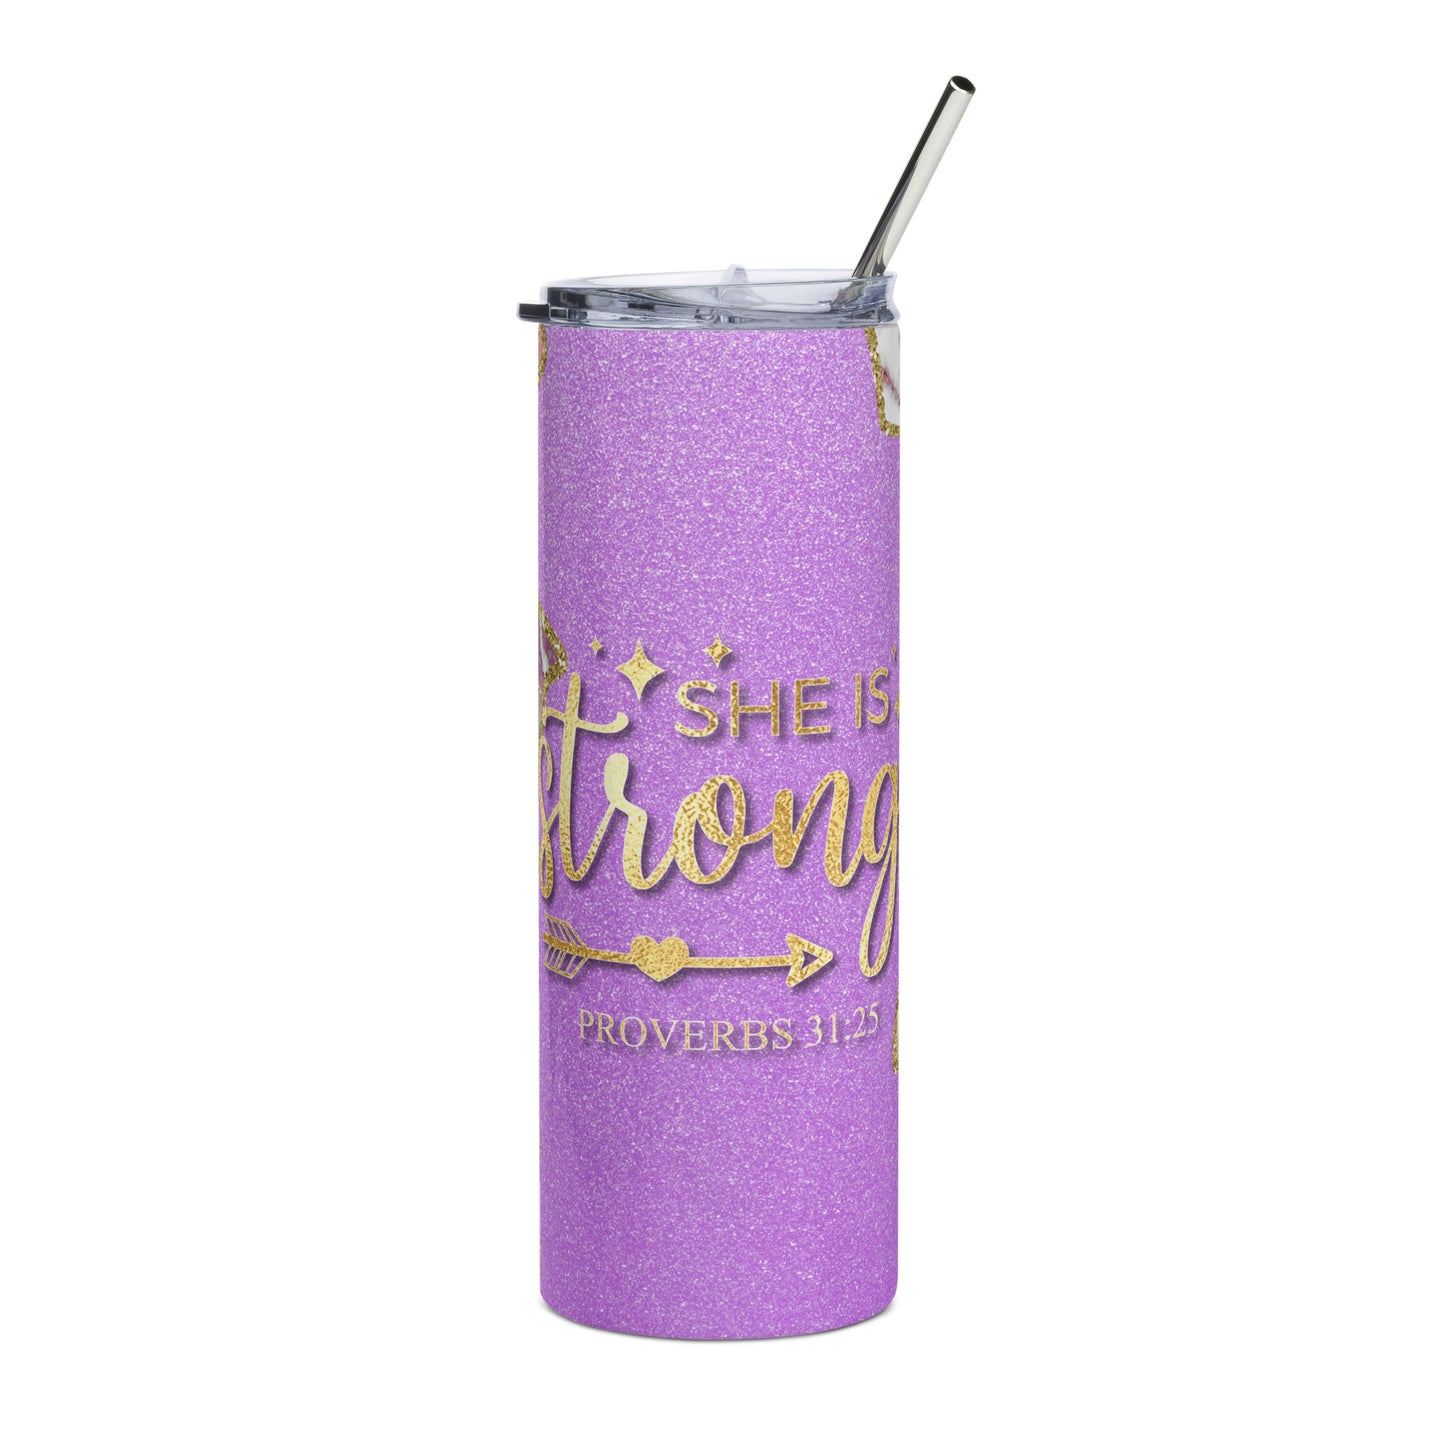 "She is Strong Tumbler" - A 20 oz empowering stainless steel tumbler celebrating strength with a motivational phrase.